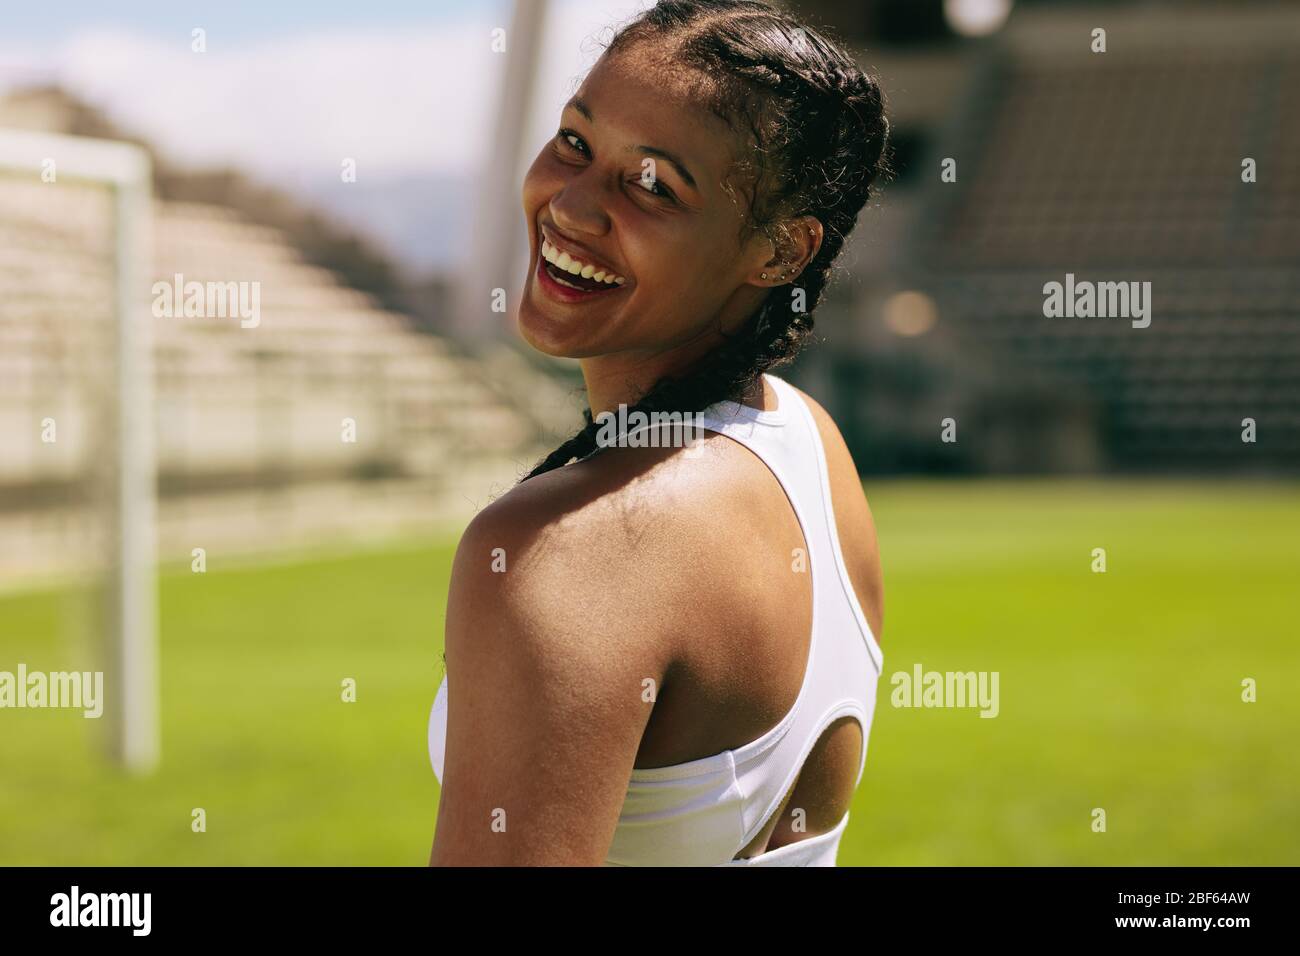 Close-up of a fit female athlete looking over her shoulder and smiling. Woman in sports clothing looking at camera and smiling at sports field. Stock Photo